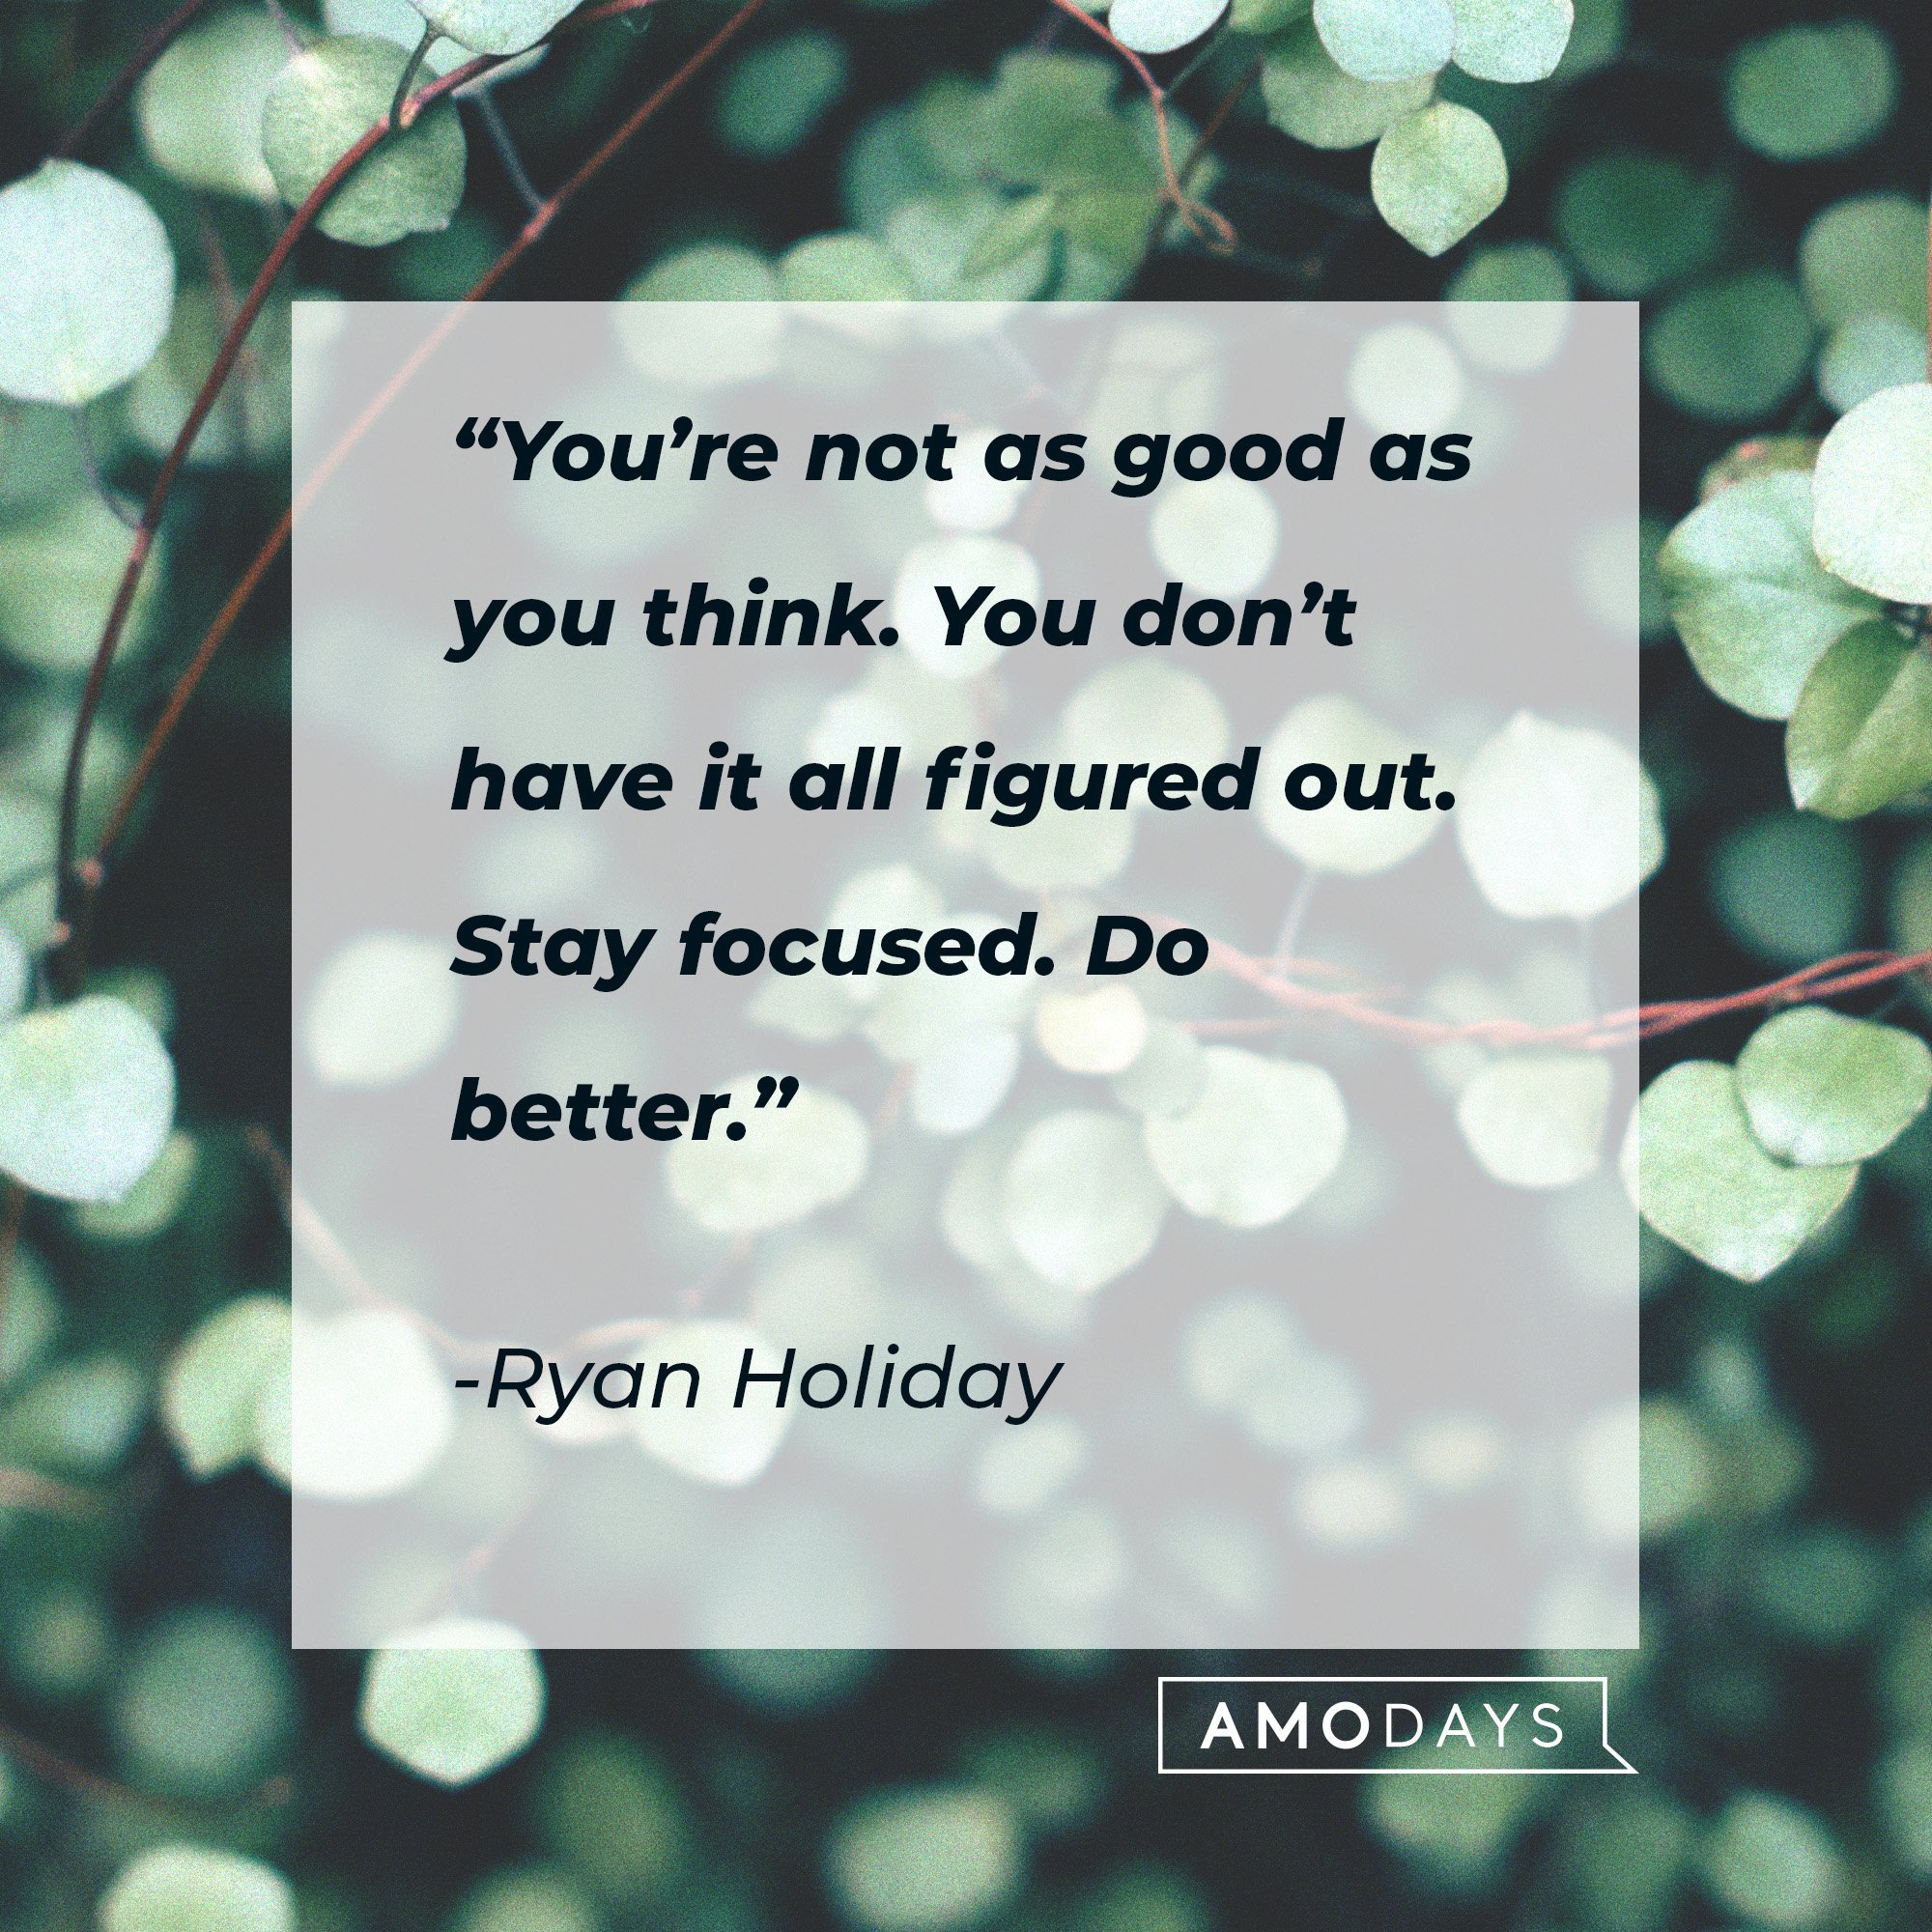 Ryan Holiday's quote: “You’re not as good as you think. You don’t have it all figured out. Stay focused. Do better.”  | Image: AmoDays